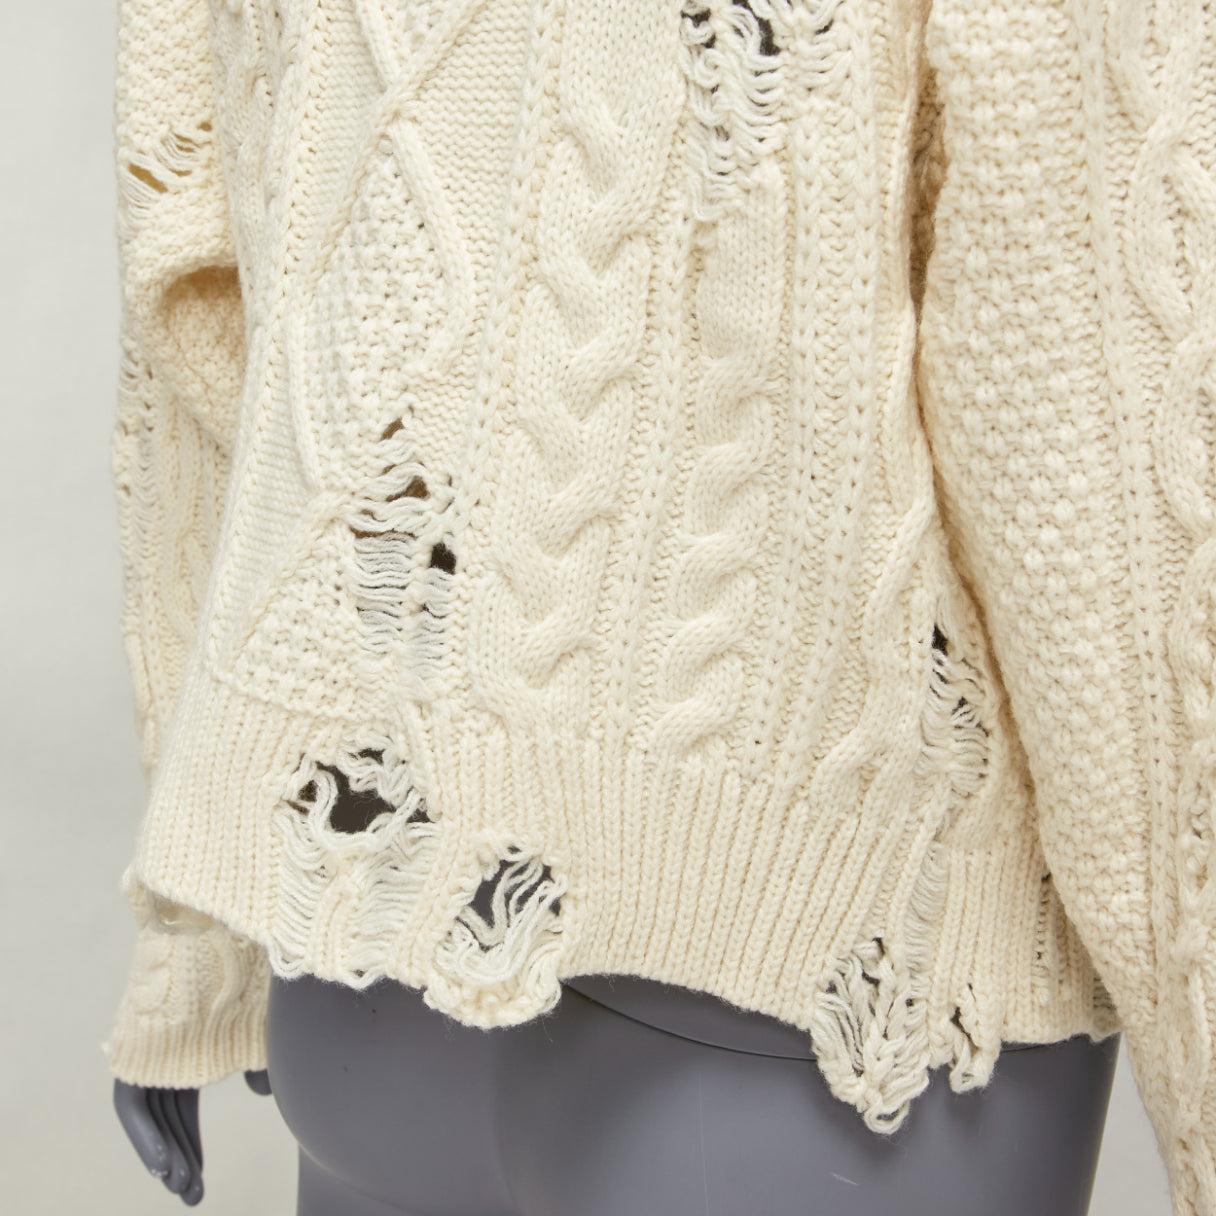 MIHARA YASUHIRO cream acrylic wool distressed cable knit pullover sweater FR36
Reference: NILI/A00023
Brand: Mihara Yasuhiro
Material: Acrylic, Wool
Color: Cream
Pattern: Solid
Lining: Unlined
Extra Details: Distressed knit.
Made in: